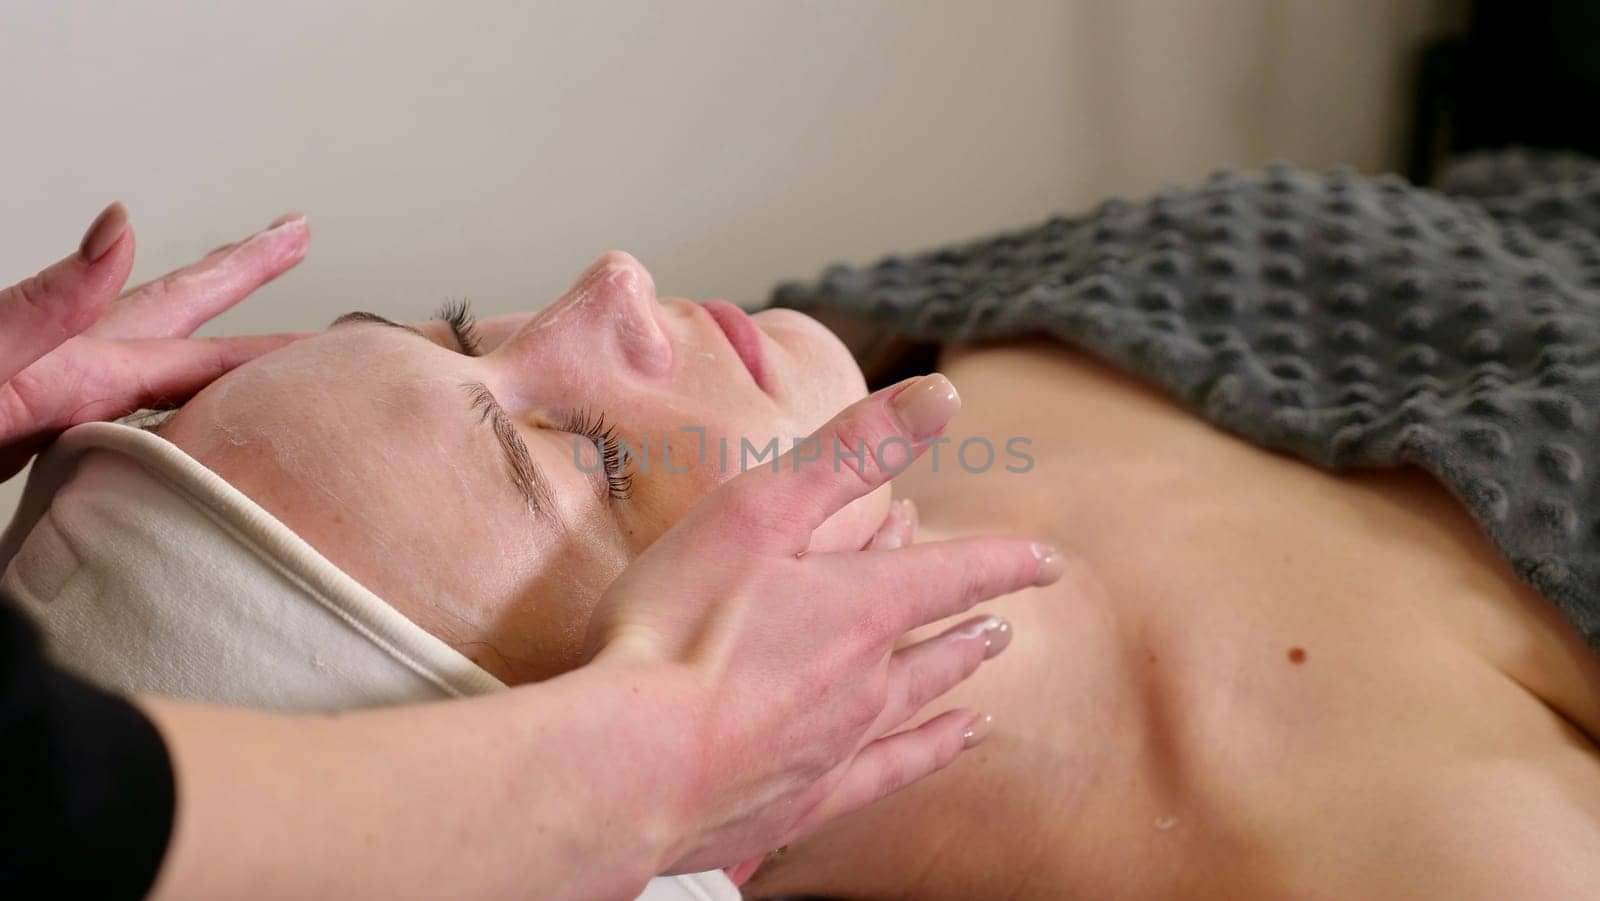 An experienced cosmetologist massage therapist performs a relaxing facial massage for the client to relieve tension, promoting deep relaxation and hydration, leaving your skin refreshed and radiant.